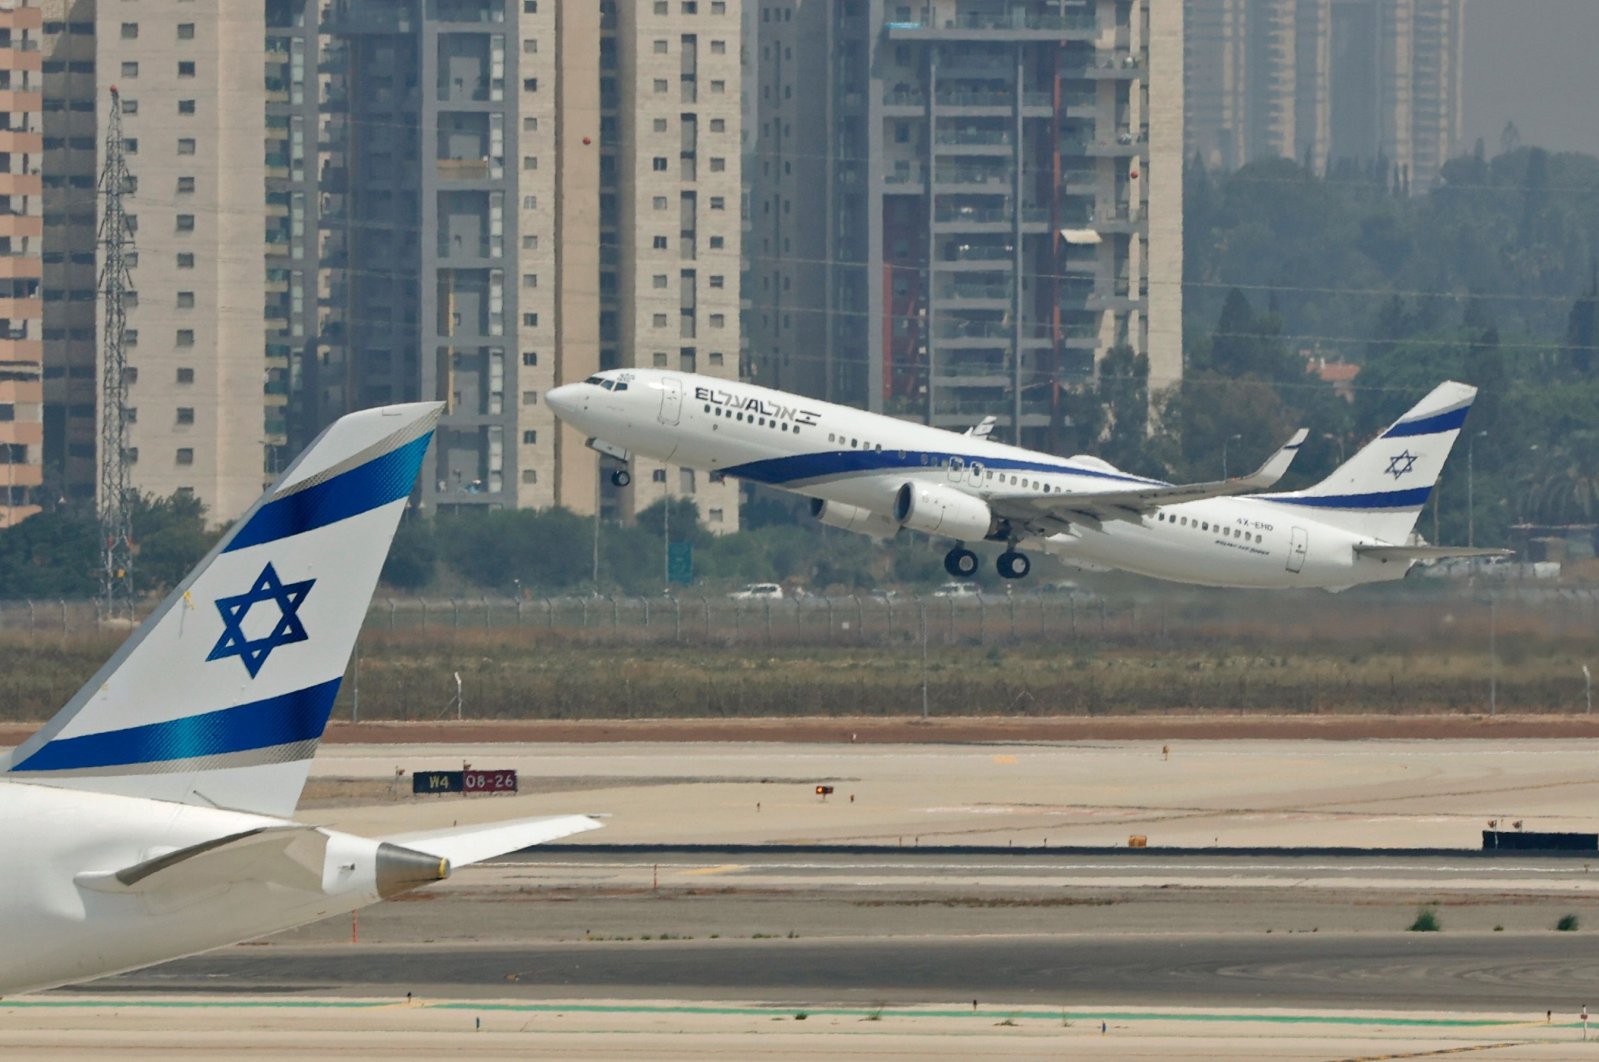 El Al's airliner, which is carrying a U.S.-Israeli delegation to the UAE following a normalization accord, takes off for the first-ever commercial flight from Israel to the UAE at the Ben Gurion Airport near Tel Aviv, Aug. 31, 2020. (AFP Photo)